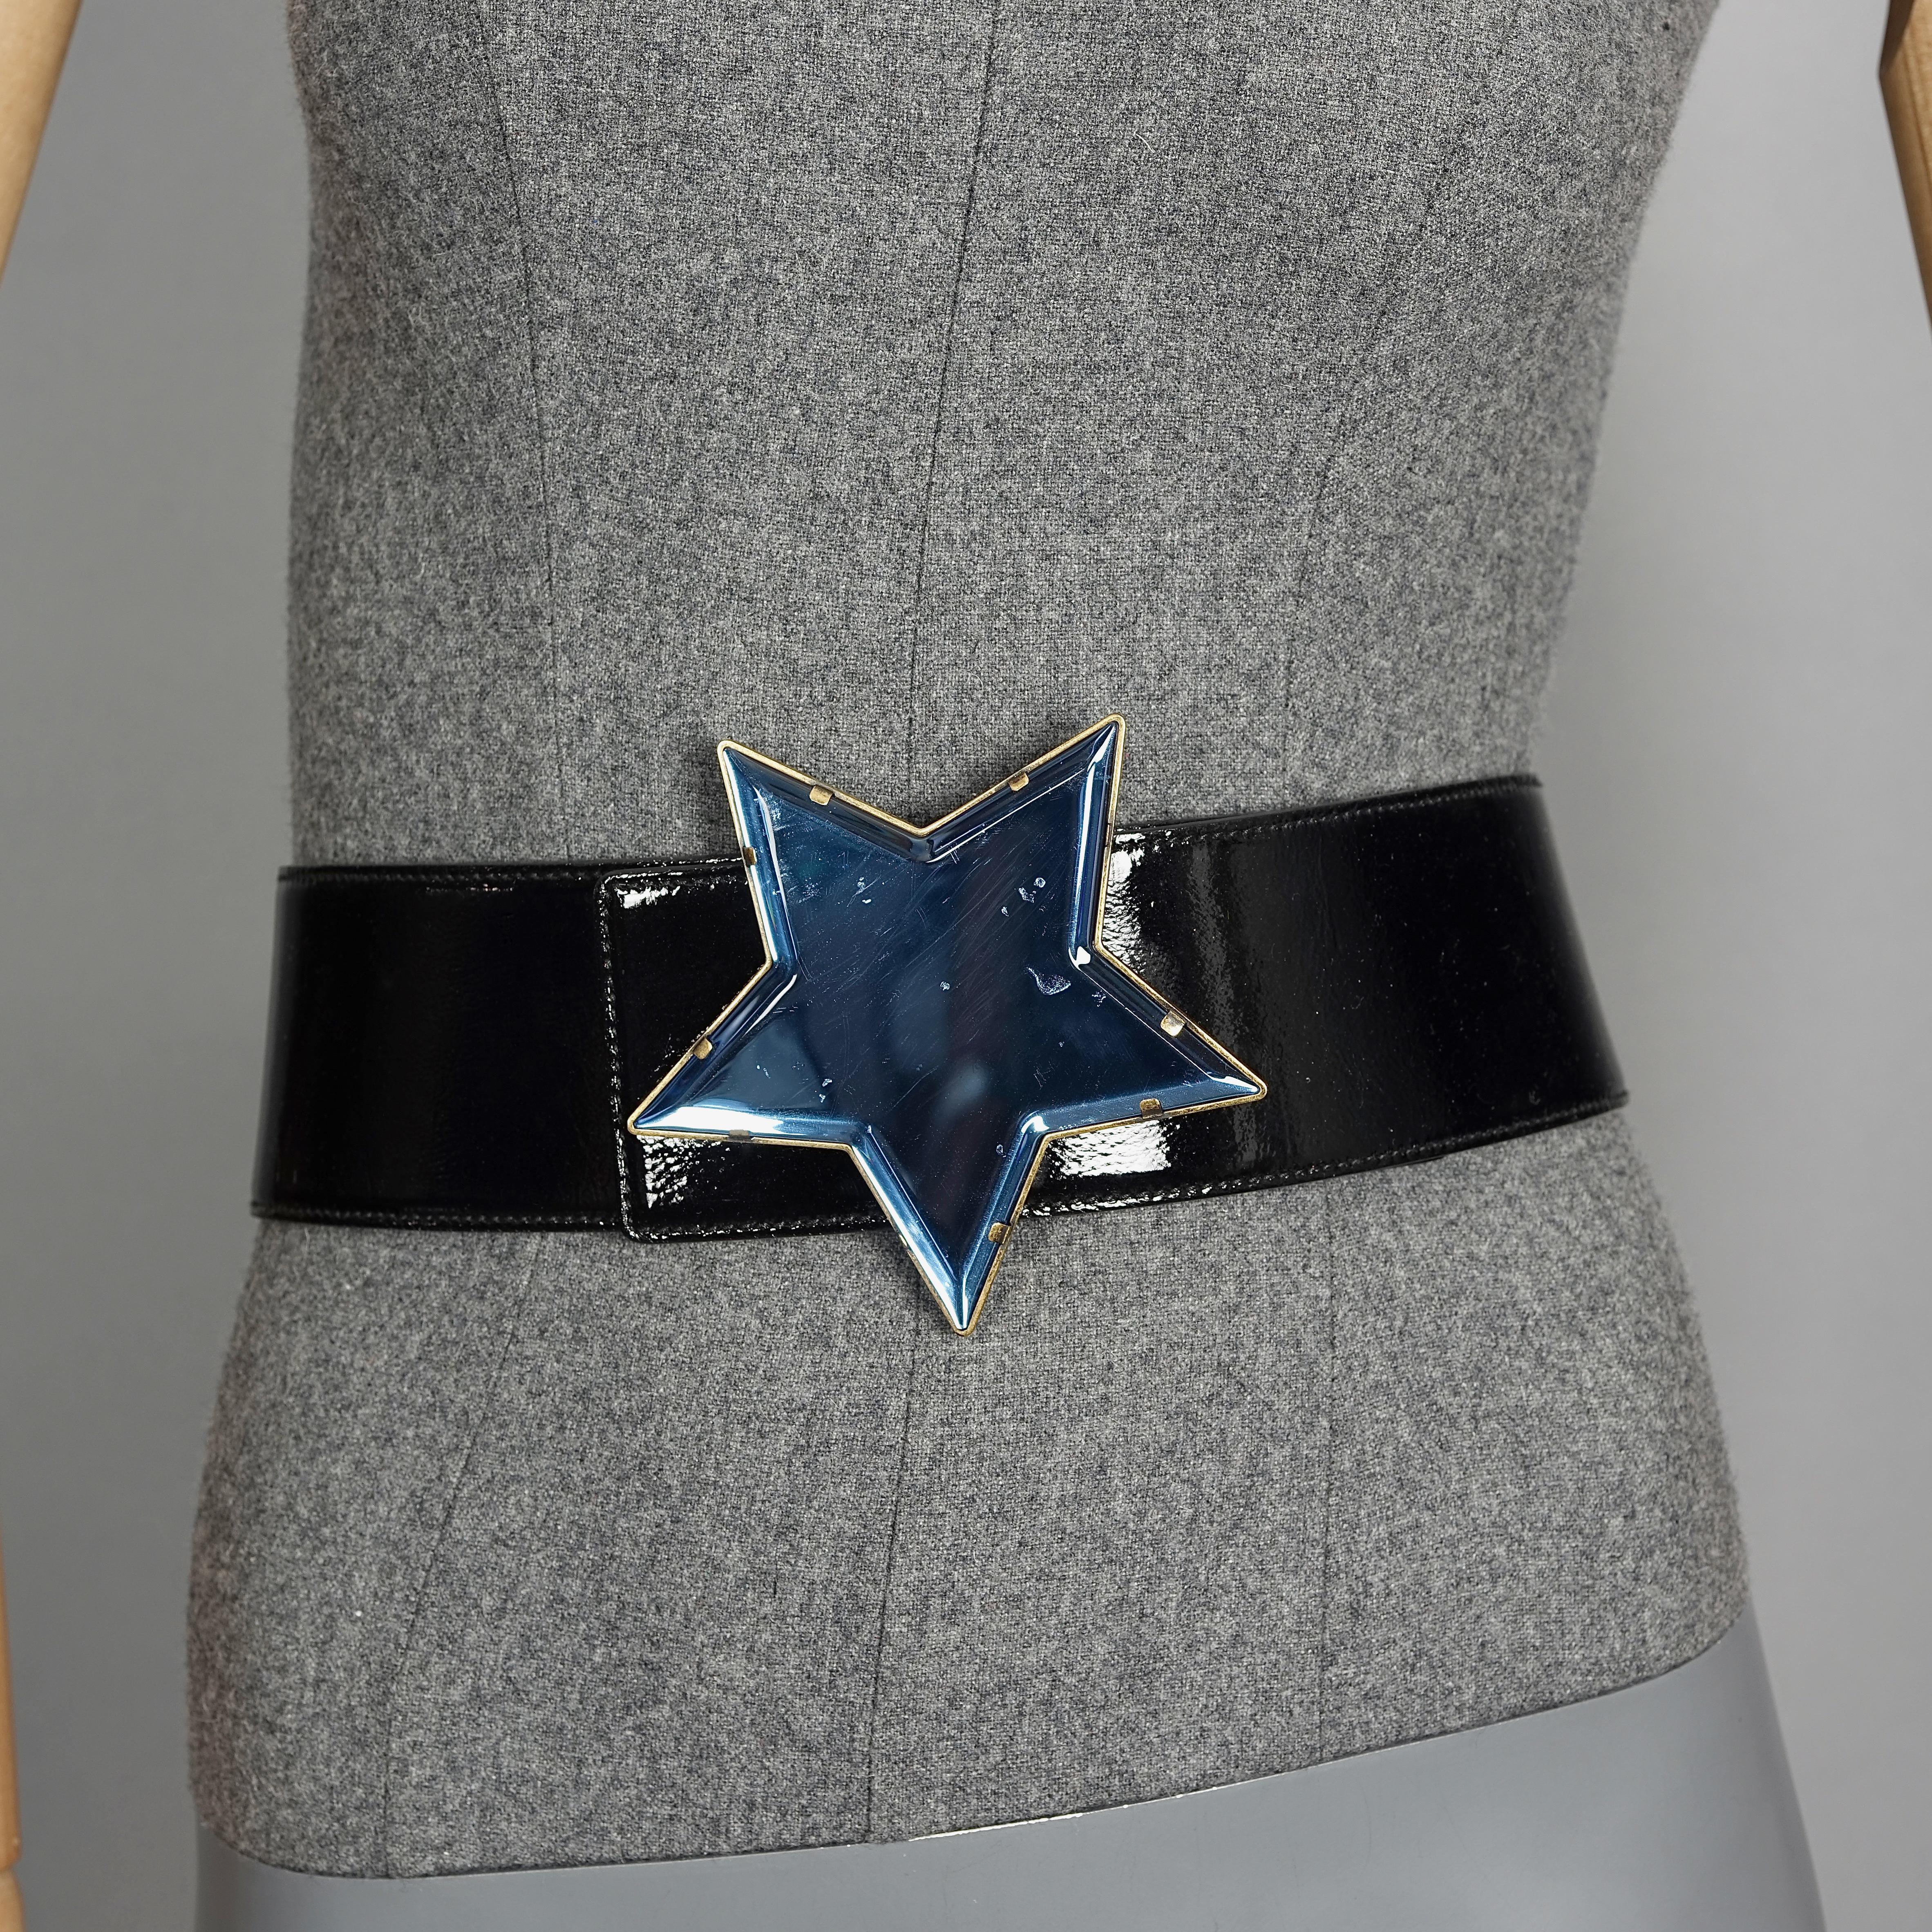 Vintage Massive YVES SAINT LAURENT Ysl Star Mirror Plexiglass Buckle Belt

Measurements:
Height: 4.13 inches (10.5 cm)
Width: 4.13 inches (10.5 cm)
Wearable Length: 28.54 inches (72.5 cm), 29.52 inches (75 cm) and 30.51 inches (77.5 cm)

Features:
-